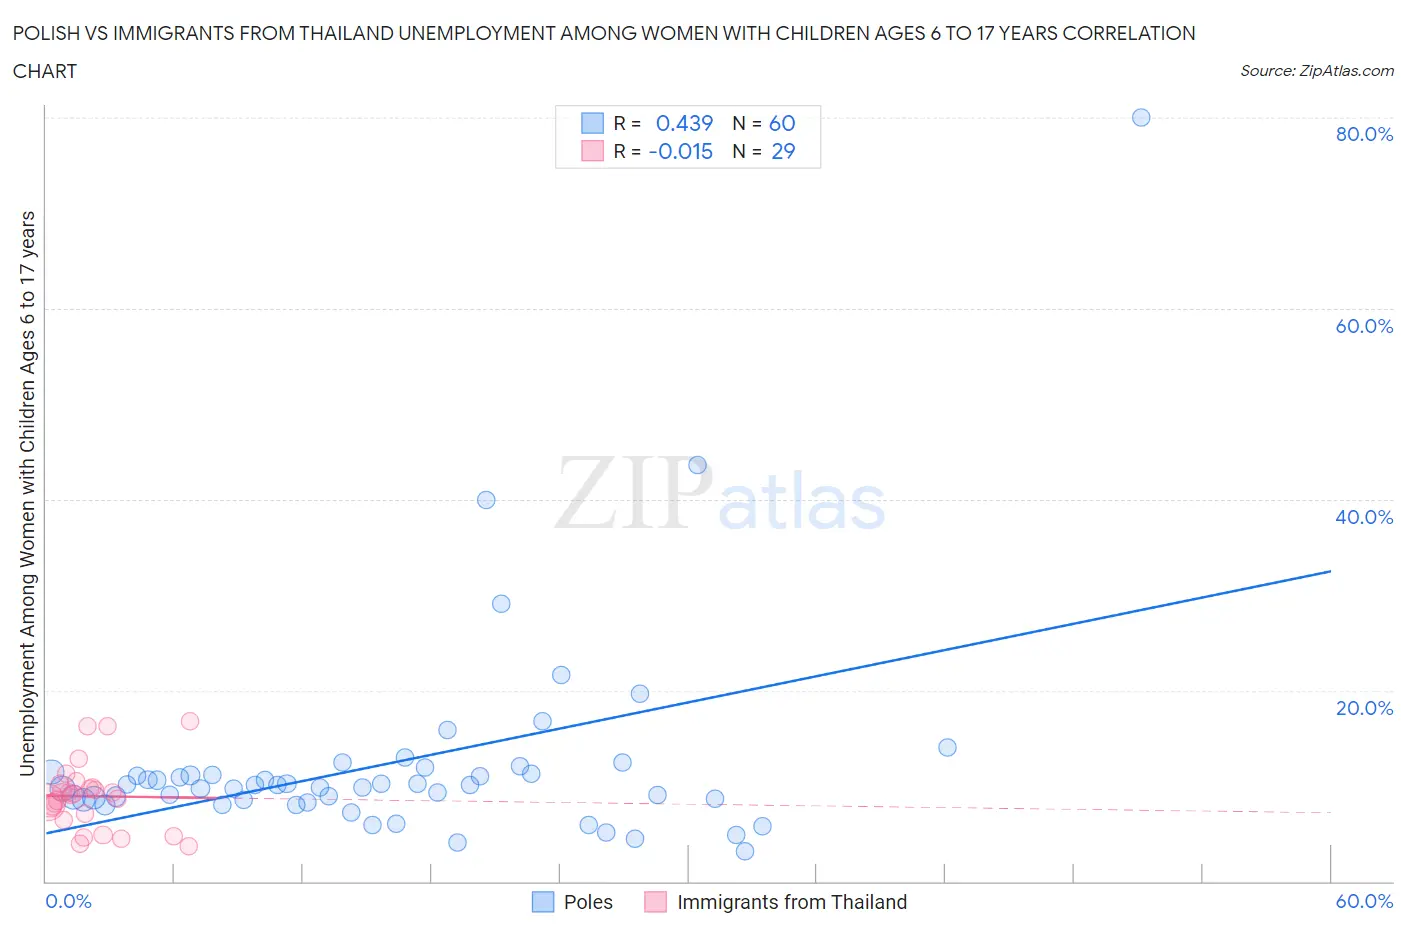 Polish vs Immigrants from Thailand Unemployment Among Women with Children Ages 6 to 17 years